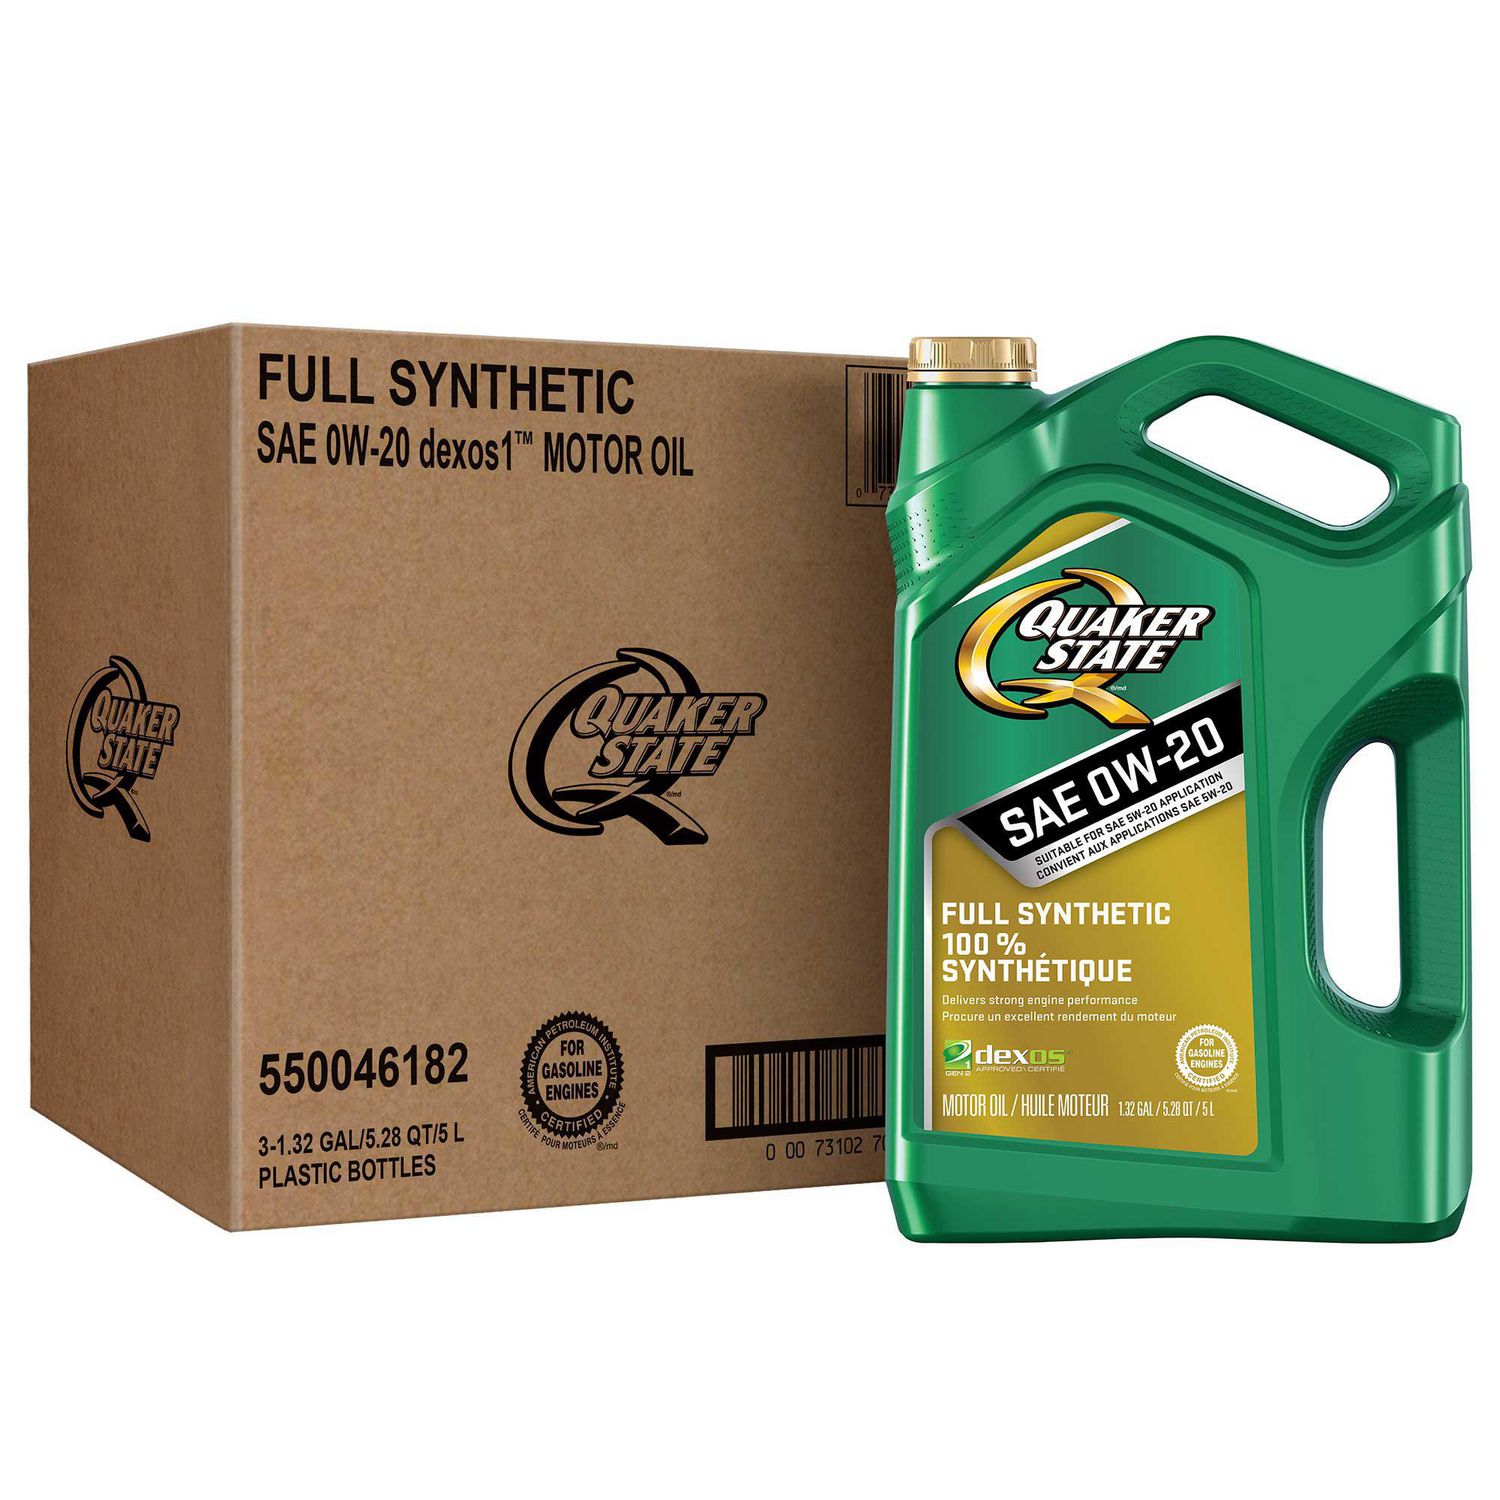 quaker-state-ultimate-durability-synthetic-motor-oil-0w20-walmart